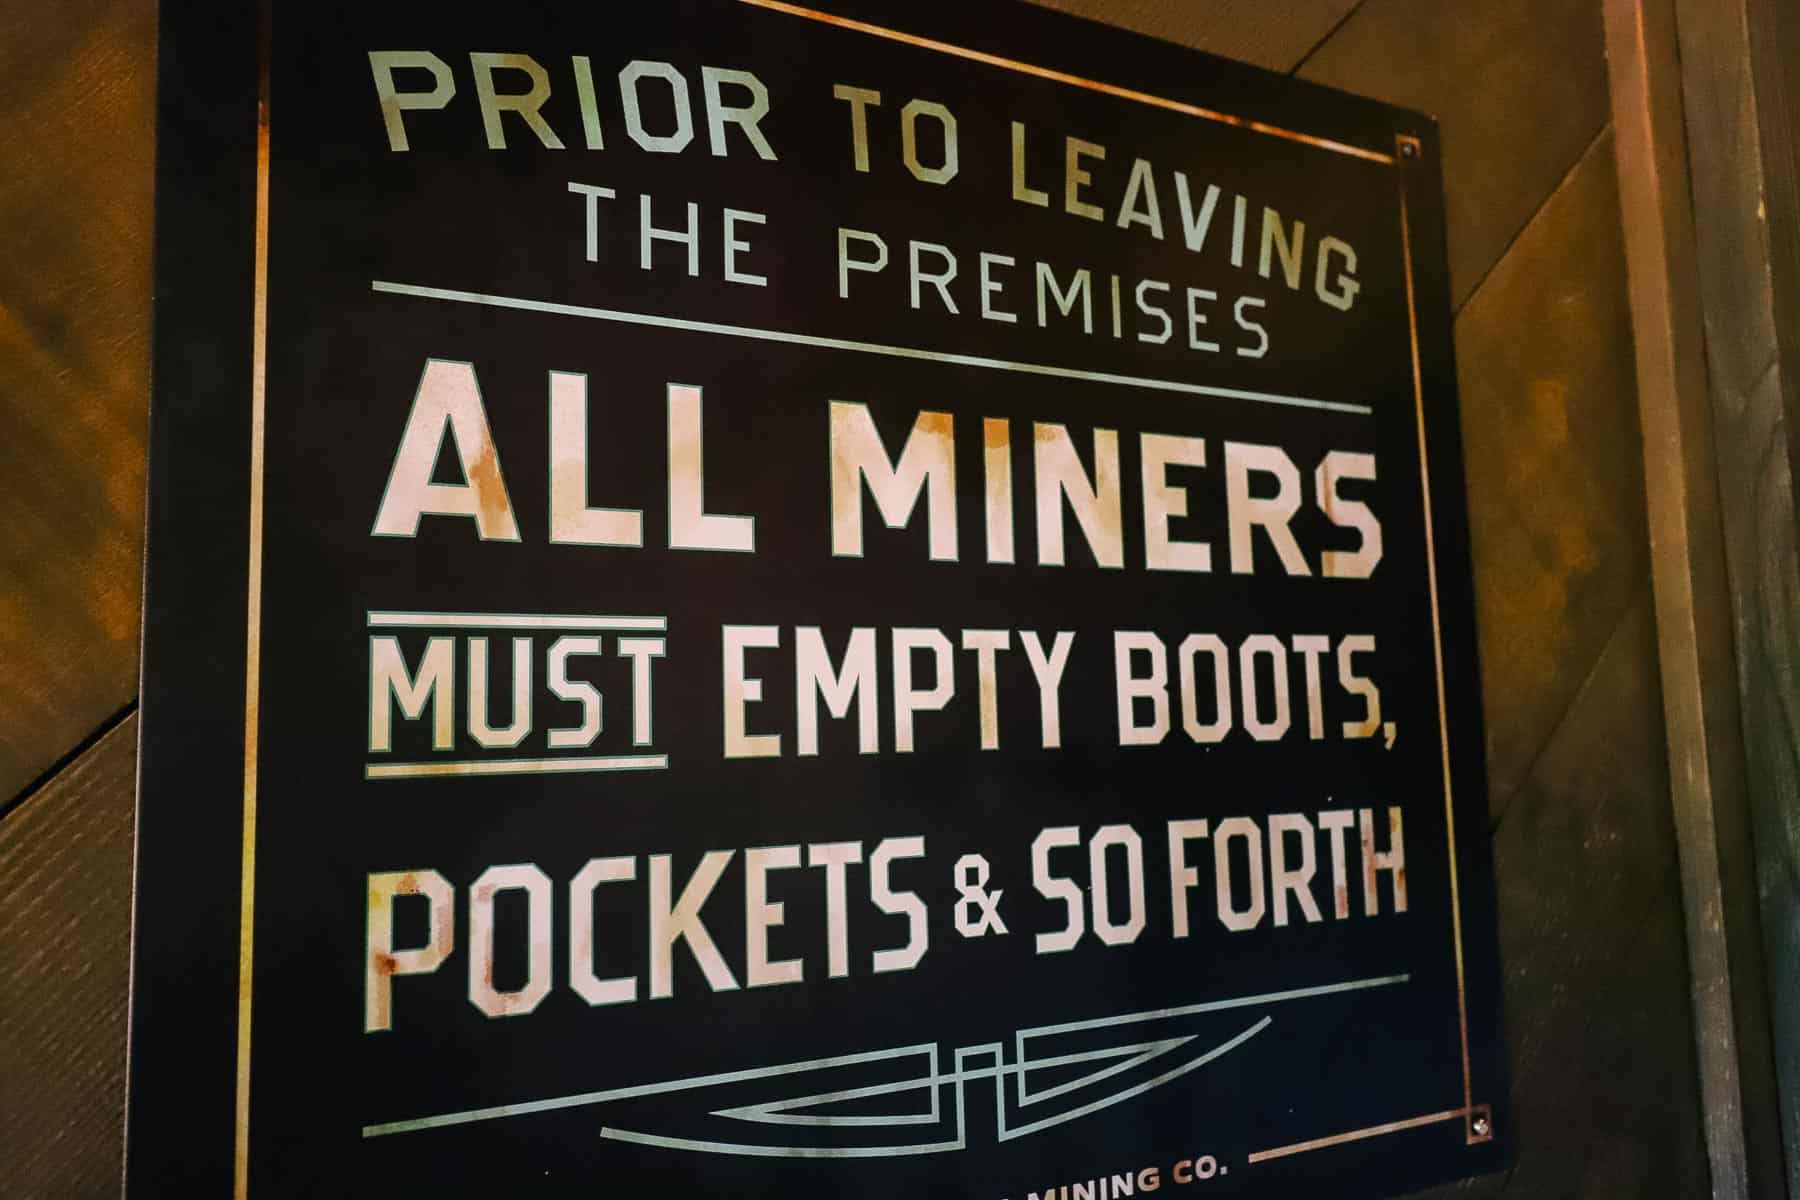 Signs warns guests that all miners must empty boots, pockets, and so forth. 